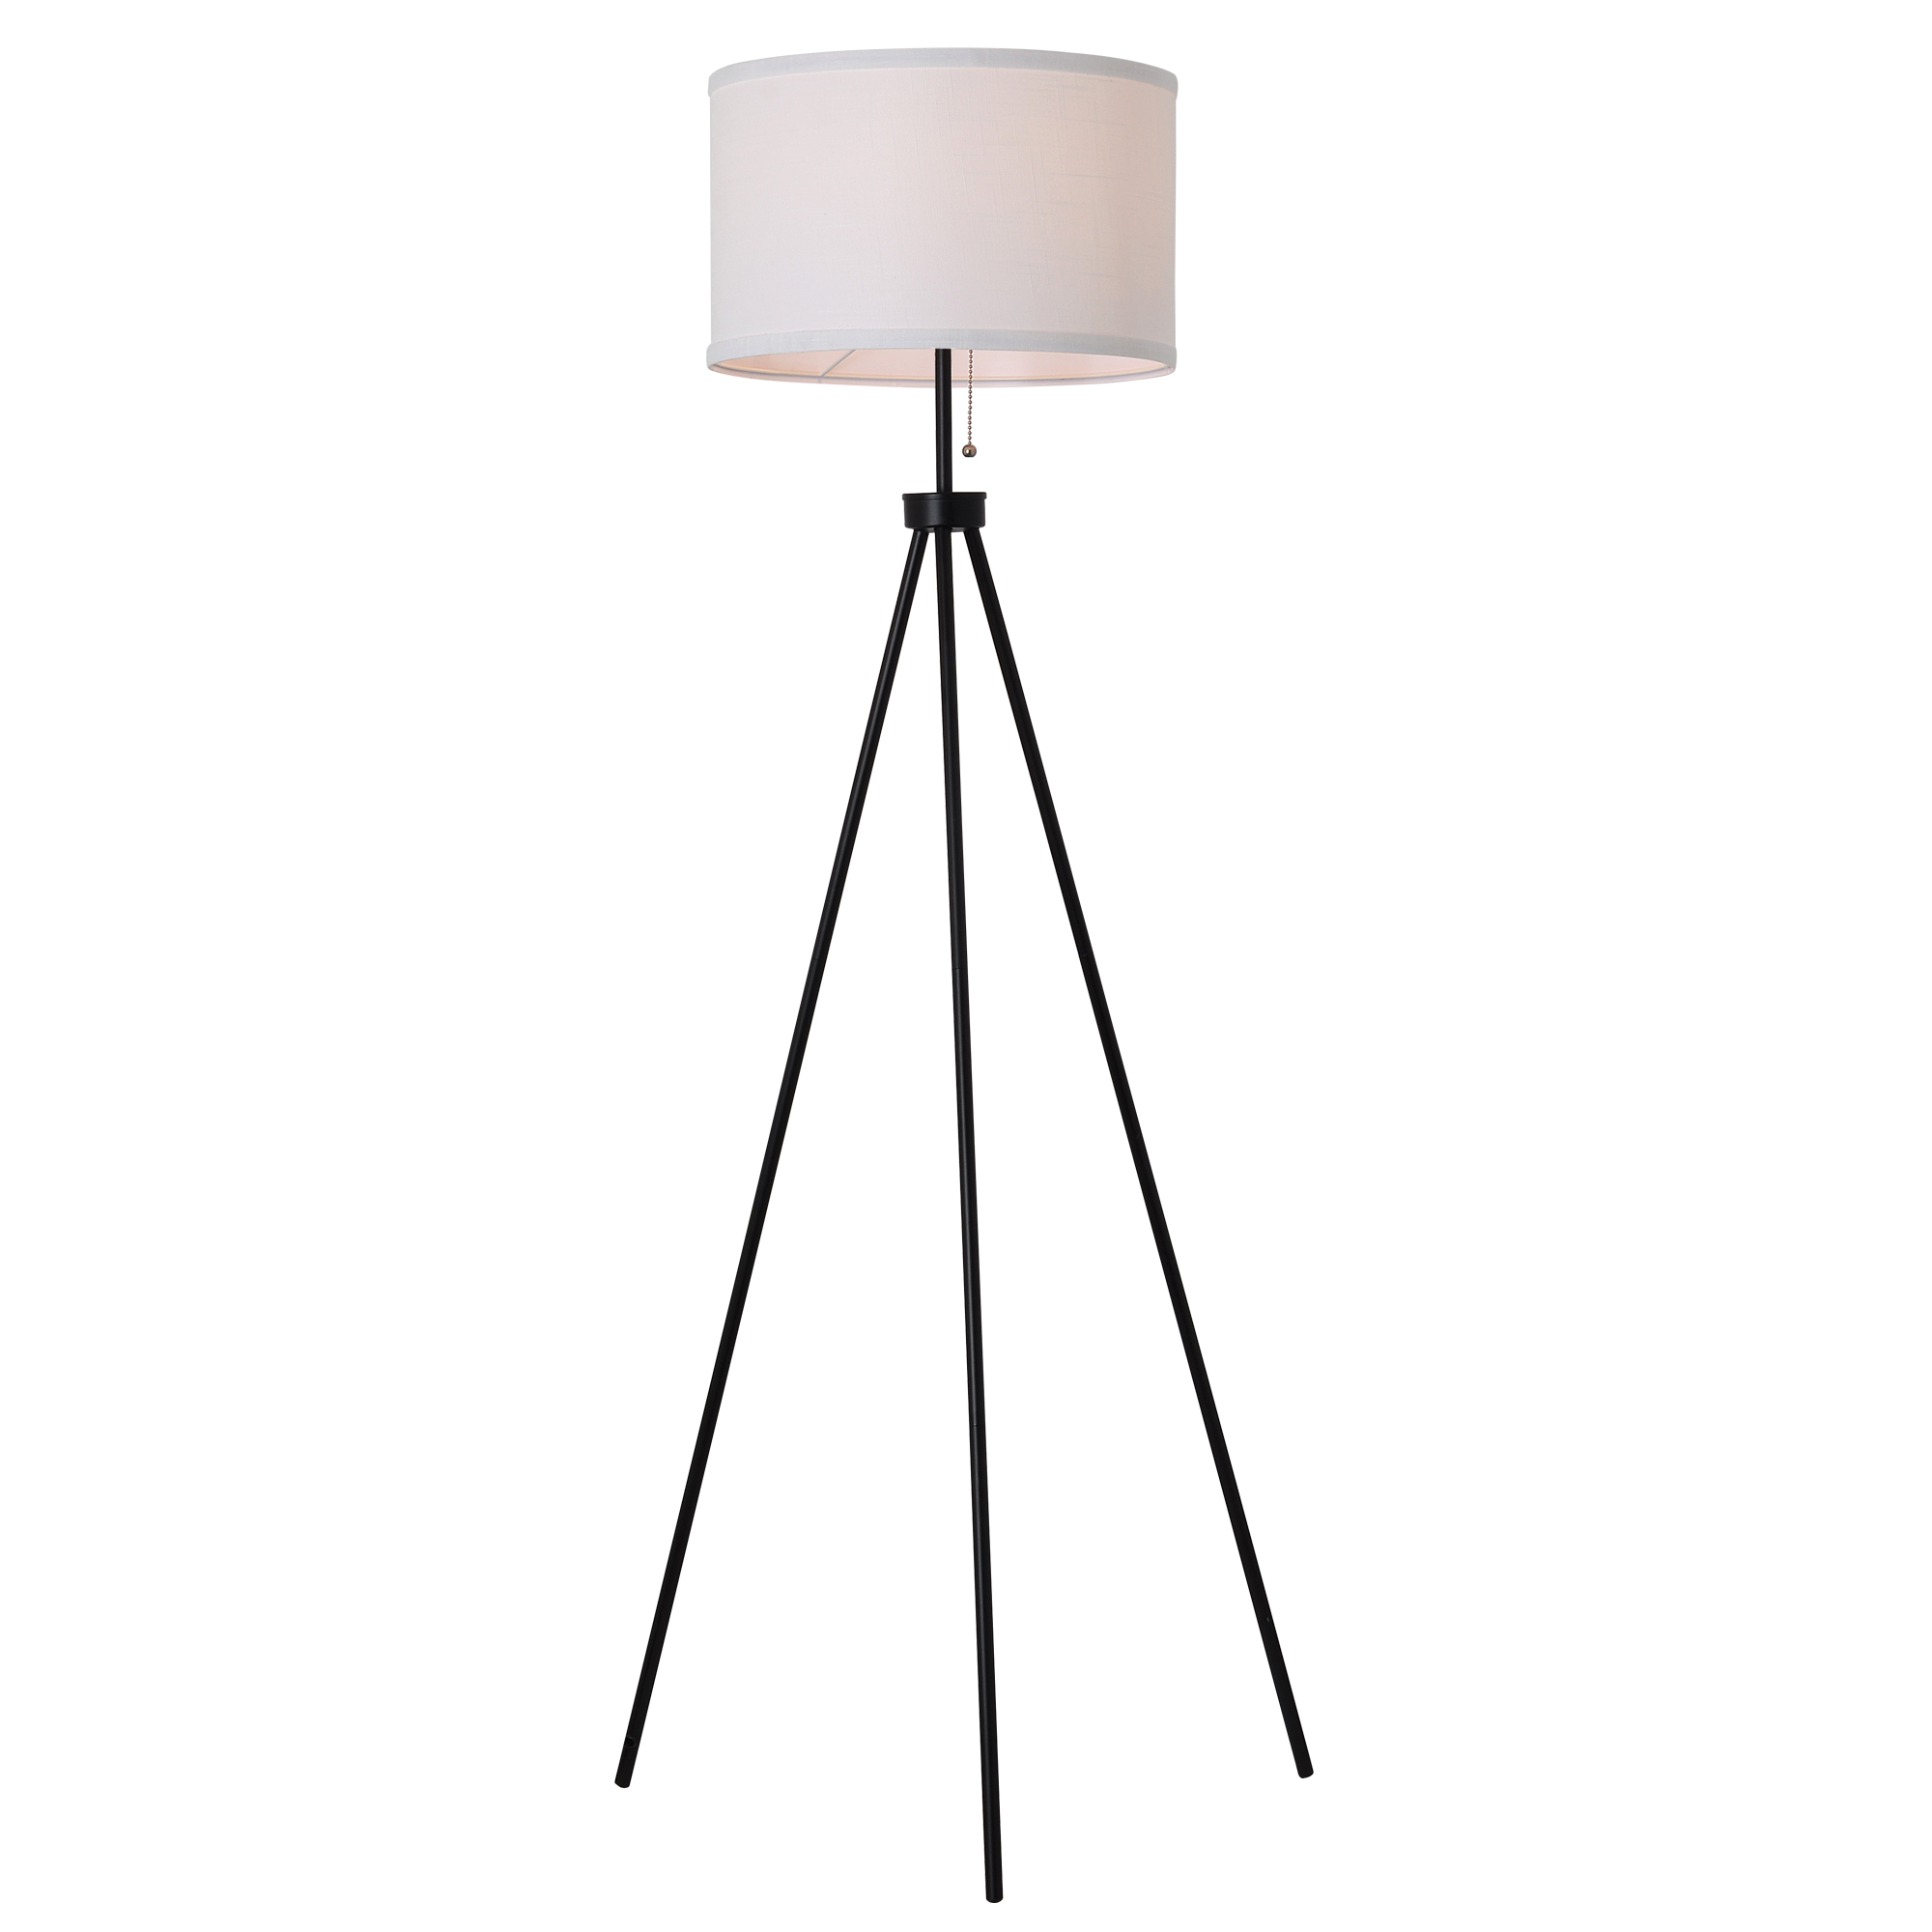 Mainstays 58" Black Metal Tripod Floor Lamp, Modern, Young Adult Dorms and Adult Home Office Use. - image 1 of 5